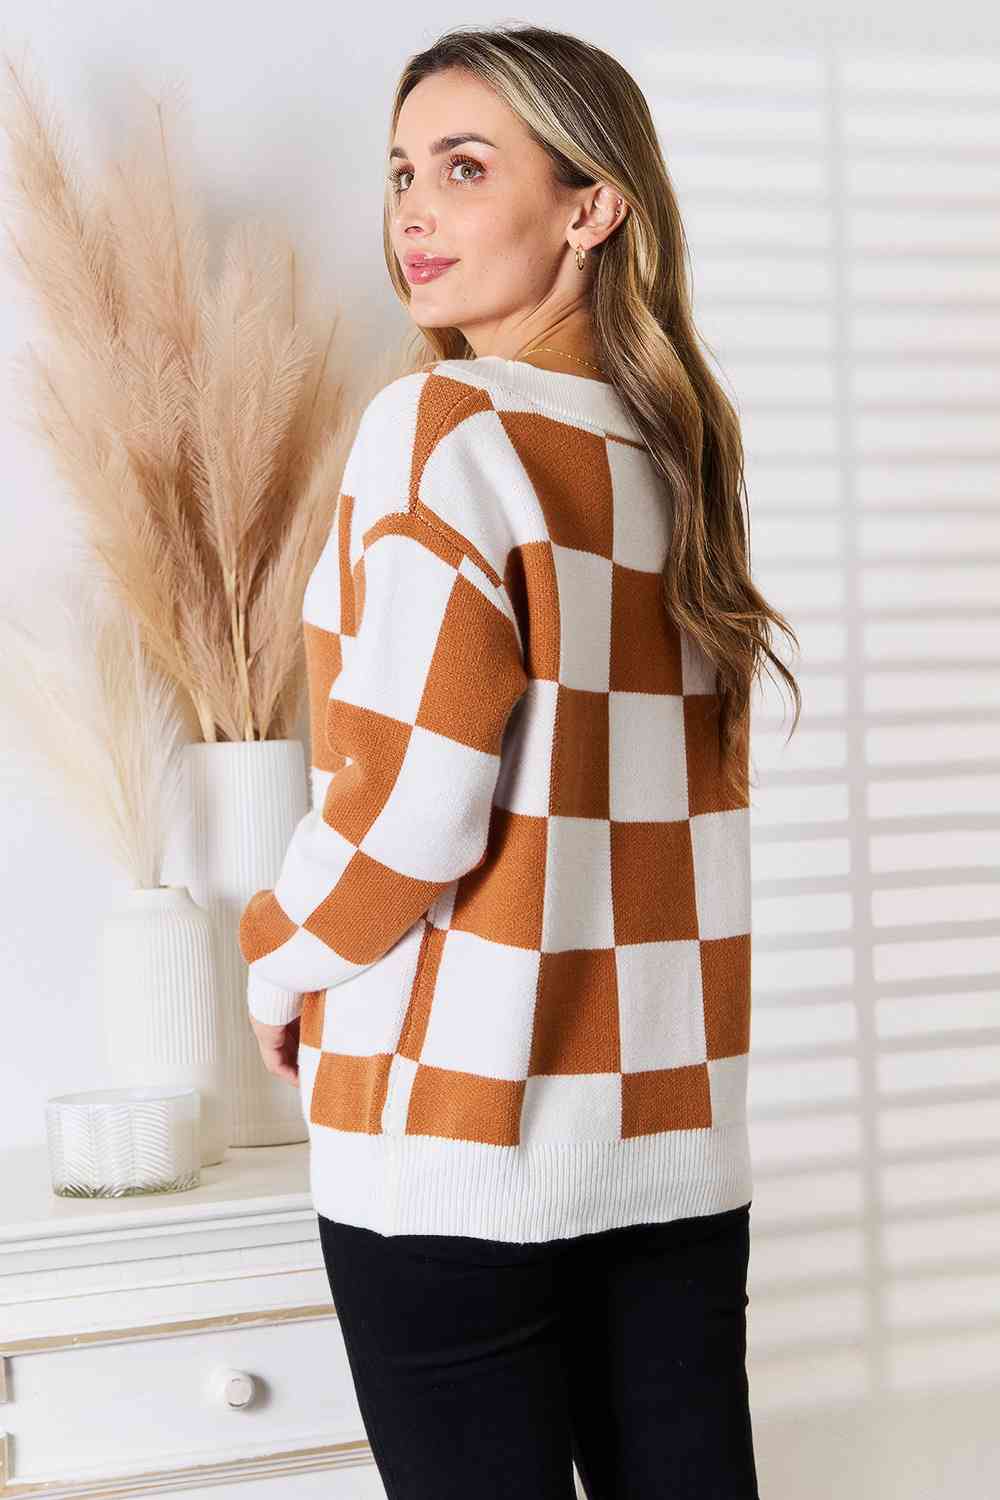 Brown and white checkered sweater